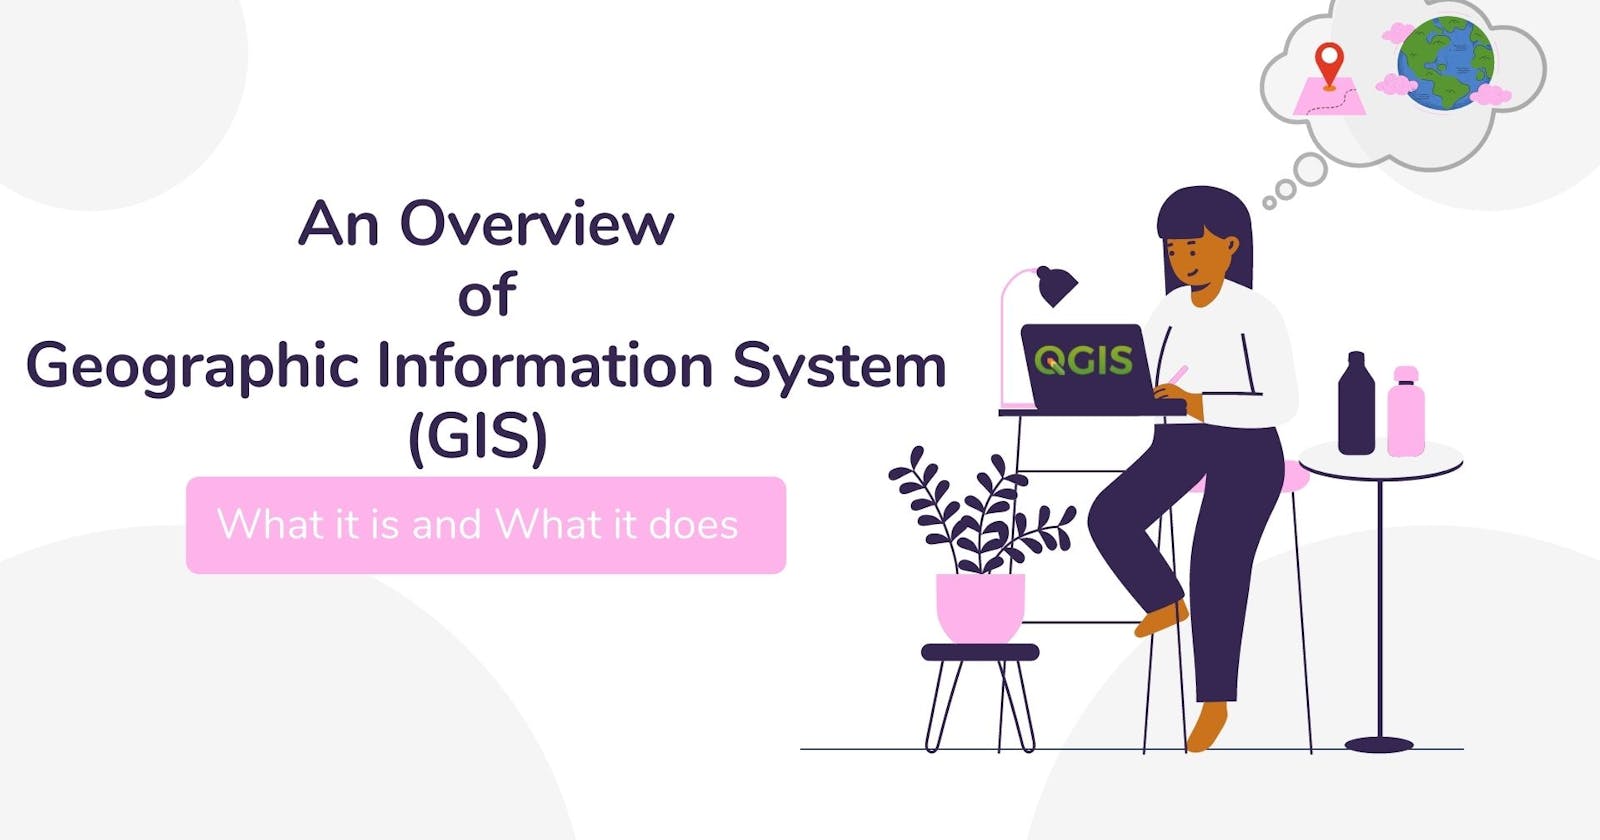 An Overview of Geographic Information System (GIS):
What it is And What it Does